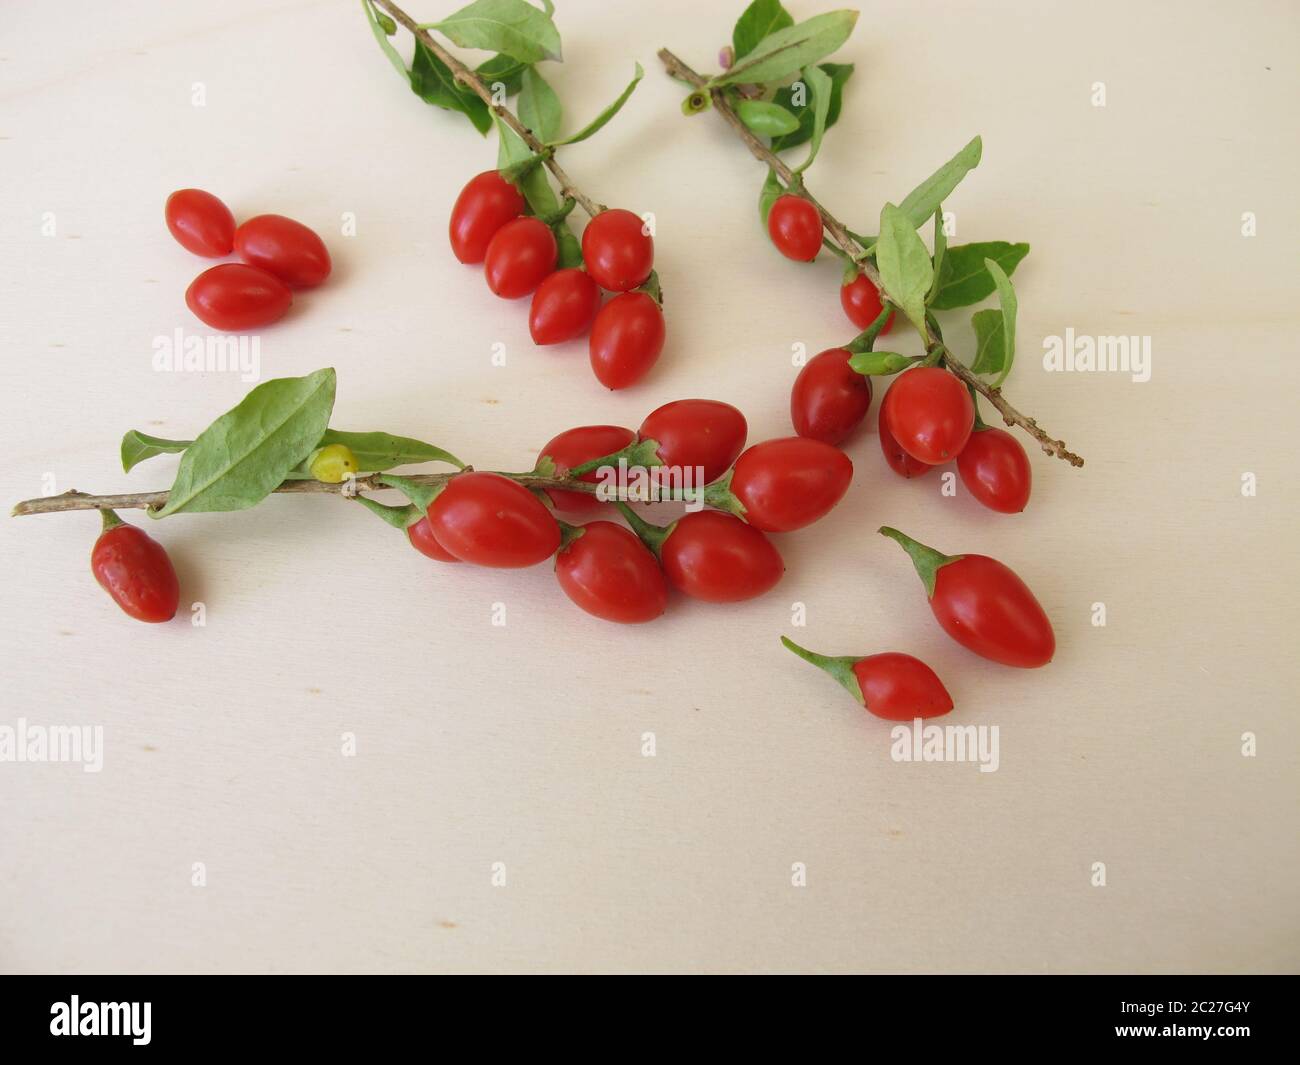 Freshly harvested goji berries, wolfberry on wooden board Stock Photo